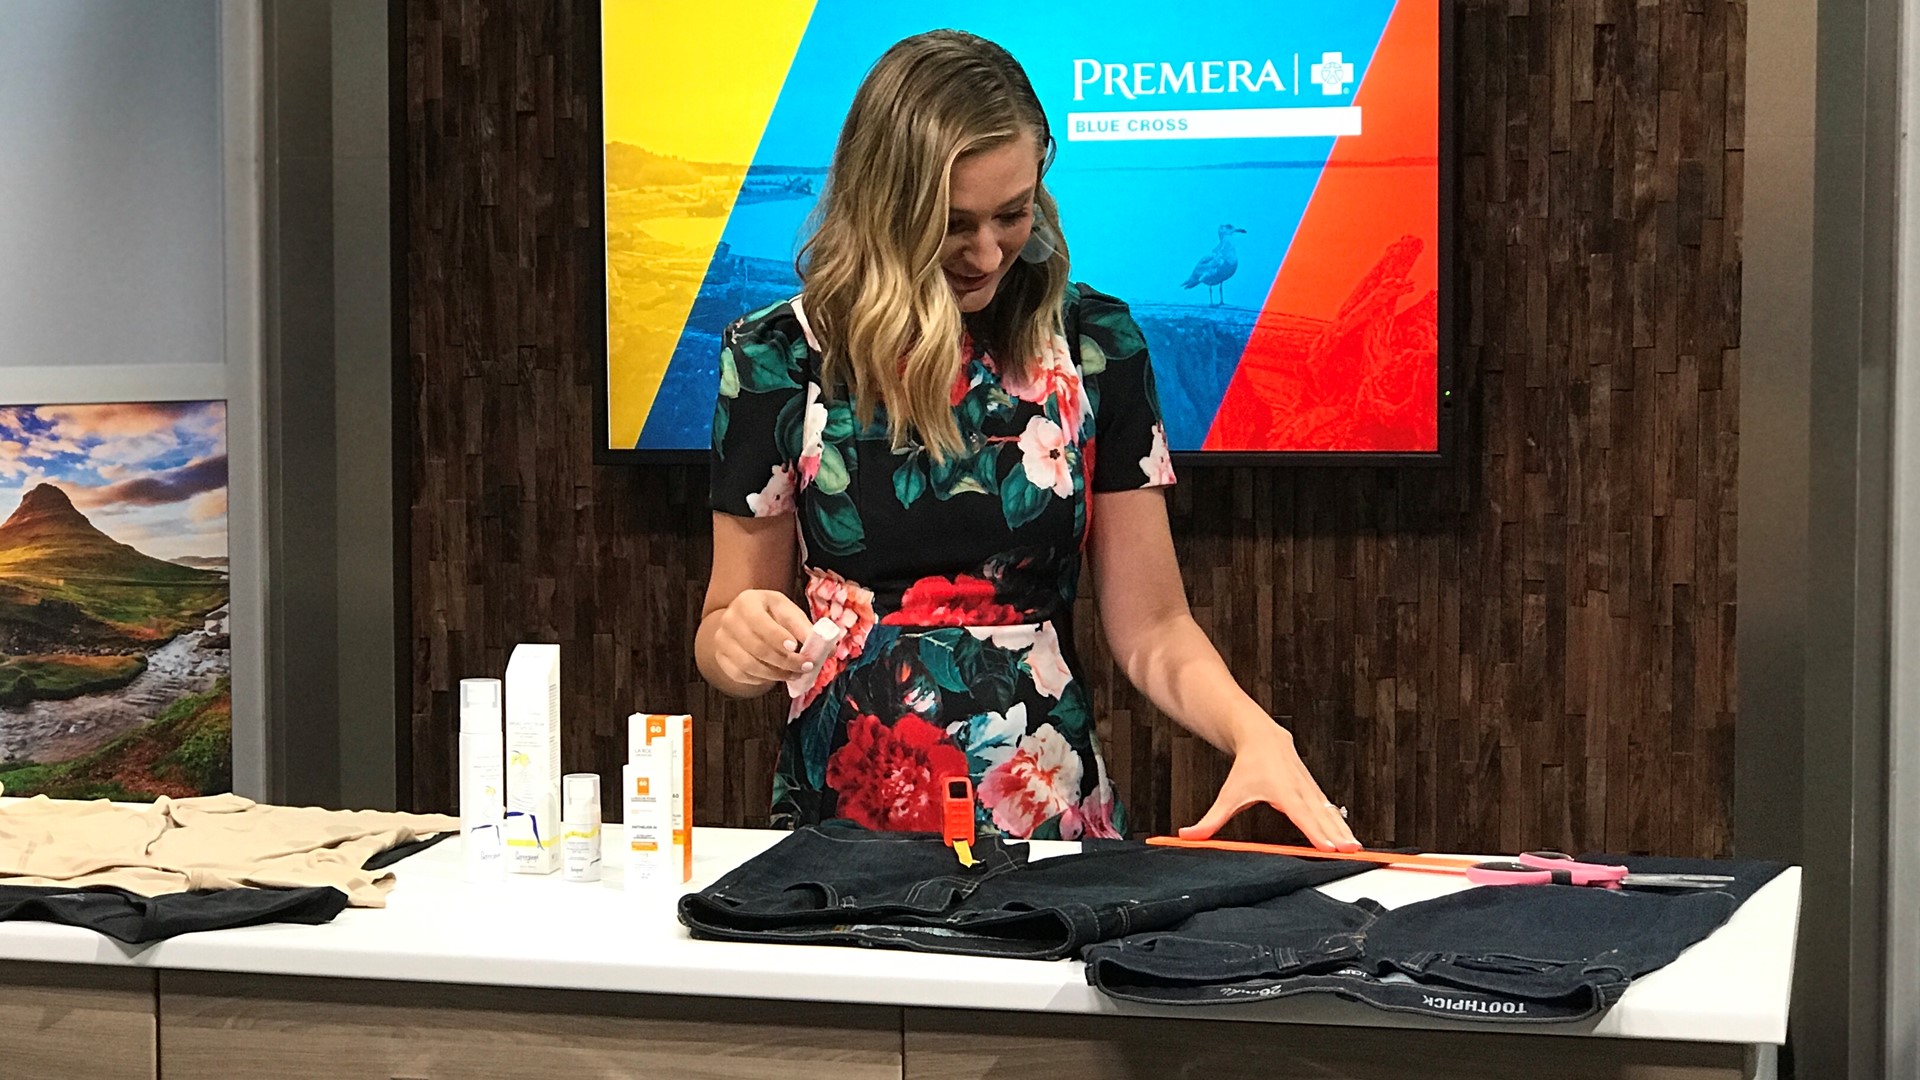 Sometimes we all just fake it 'til we make it when it comes to fashion, but Darcy Camden from Styled Seattle is here to answer some questions we've all wondered about in the back of our heads when we put on a pair of white pants or get frustrated when our makeup look just doesn't stand up against the summer heat.